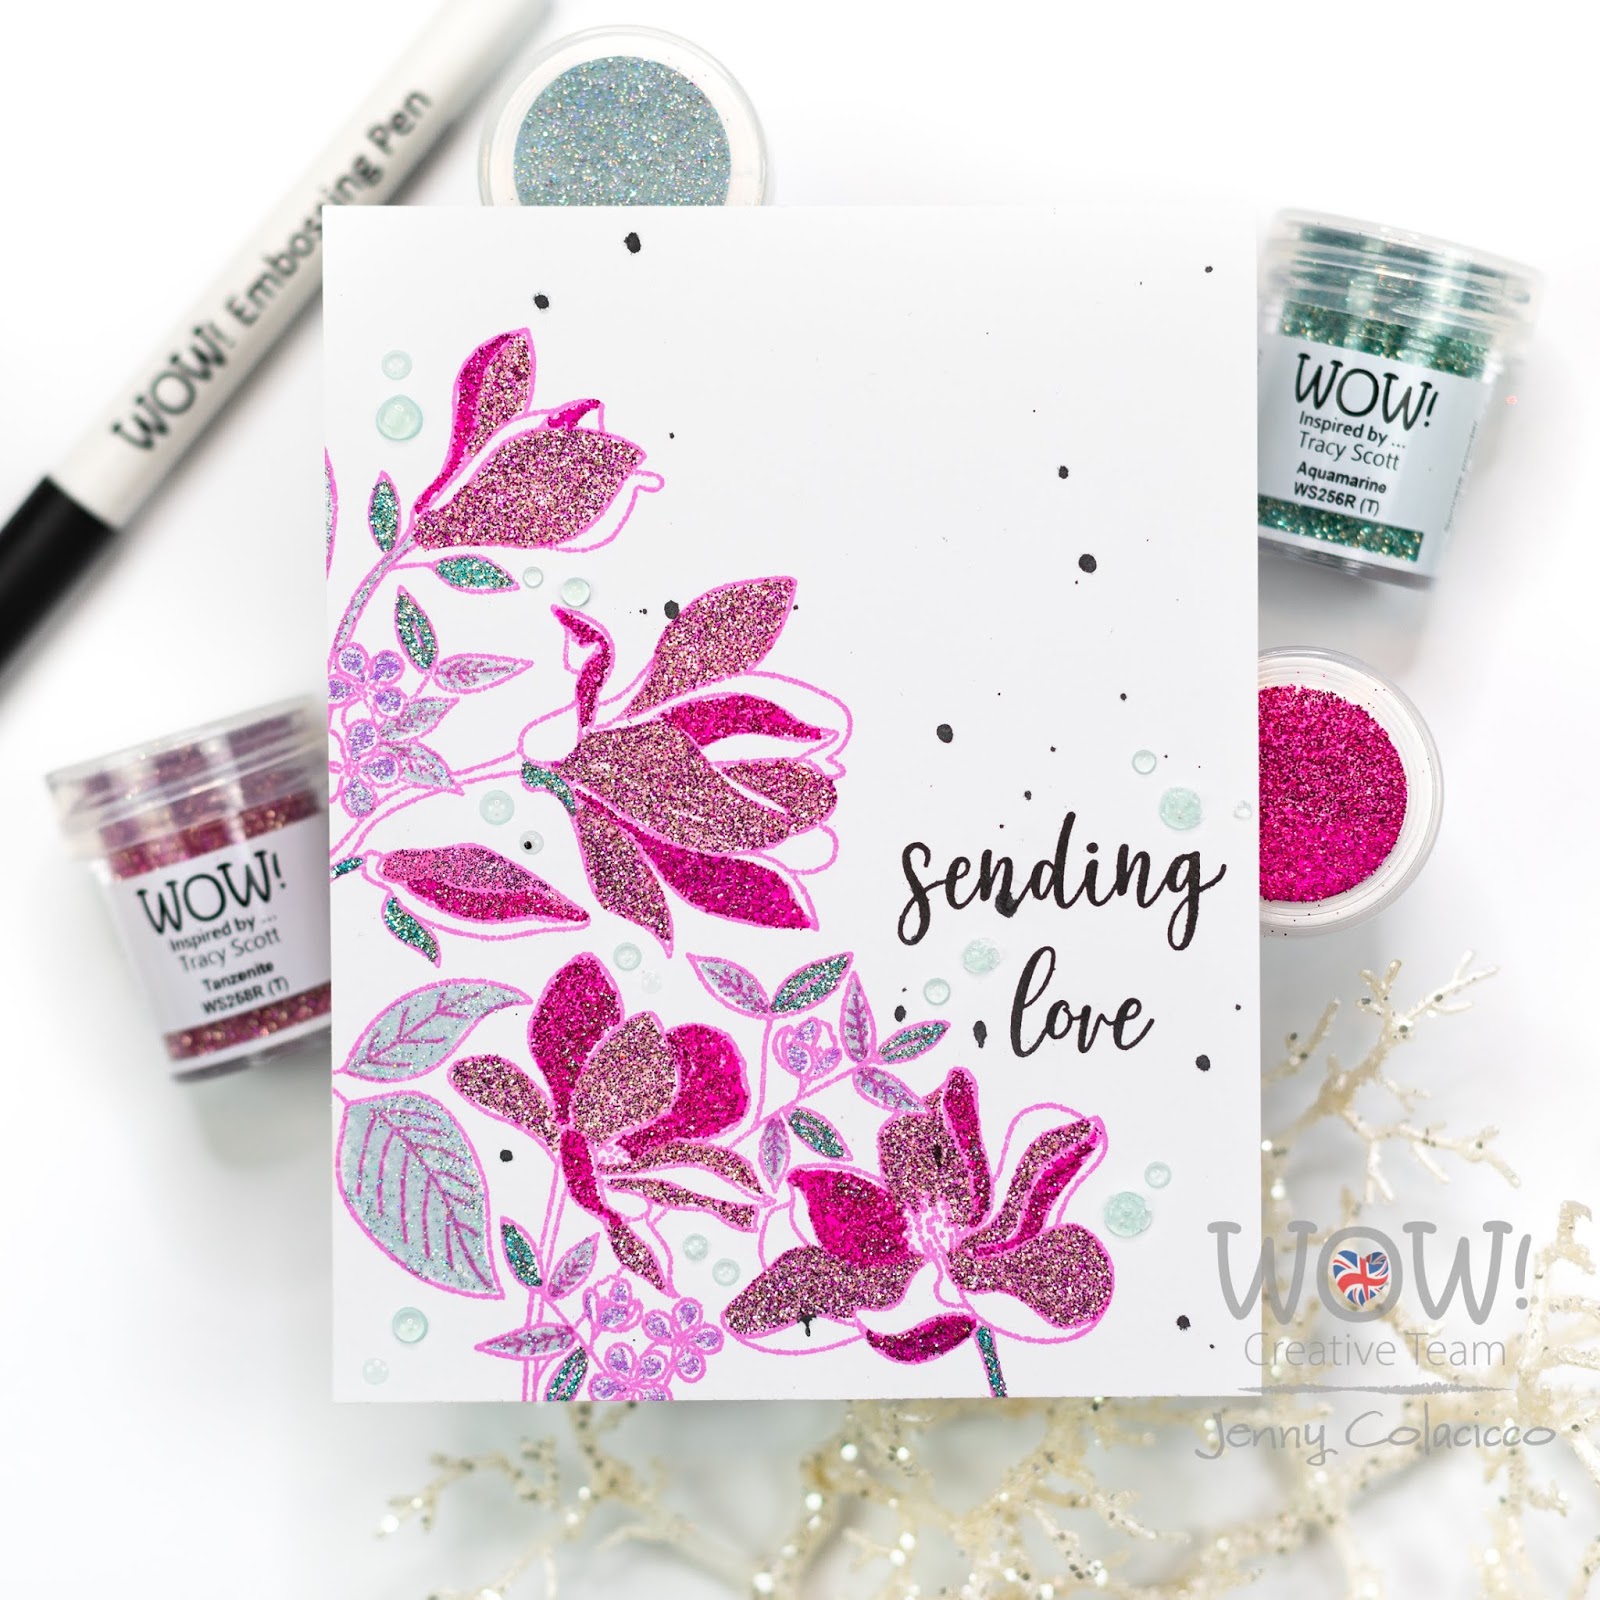 VIDEO: Three Ways to Use an Embossing Pen with Jenny Colacicco